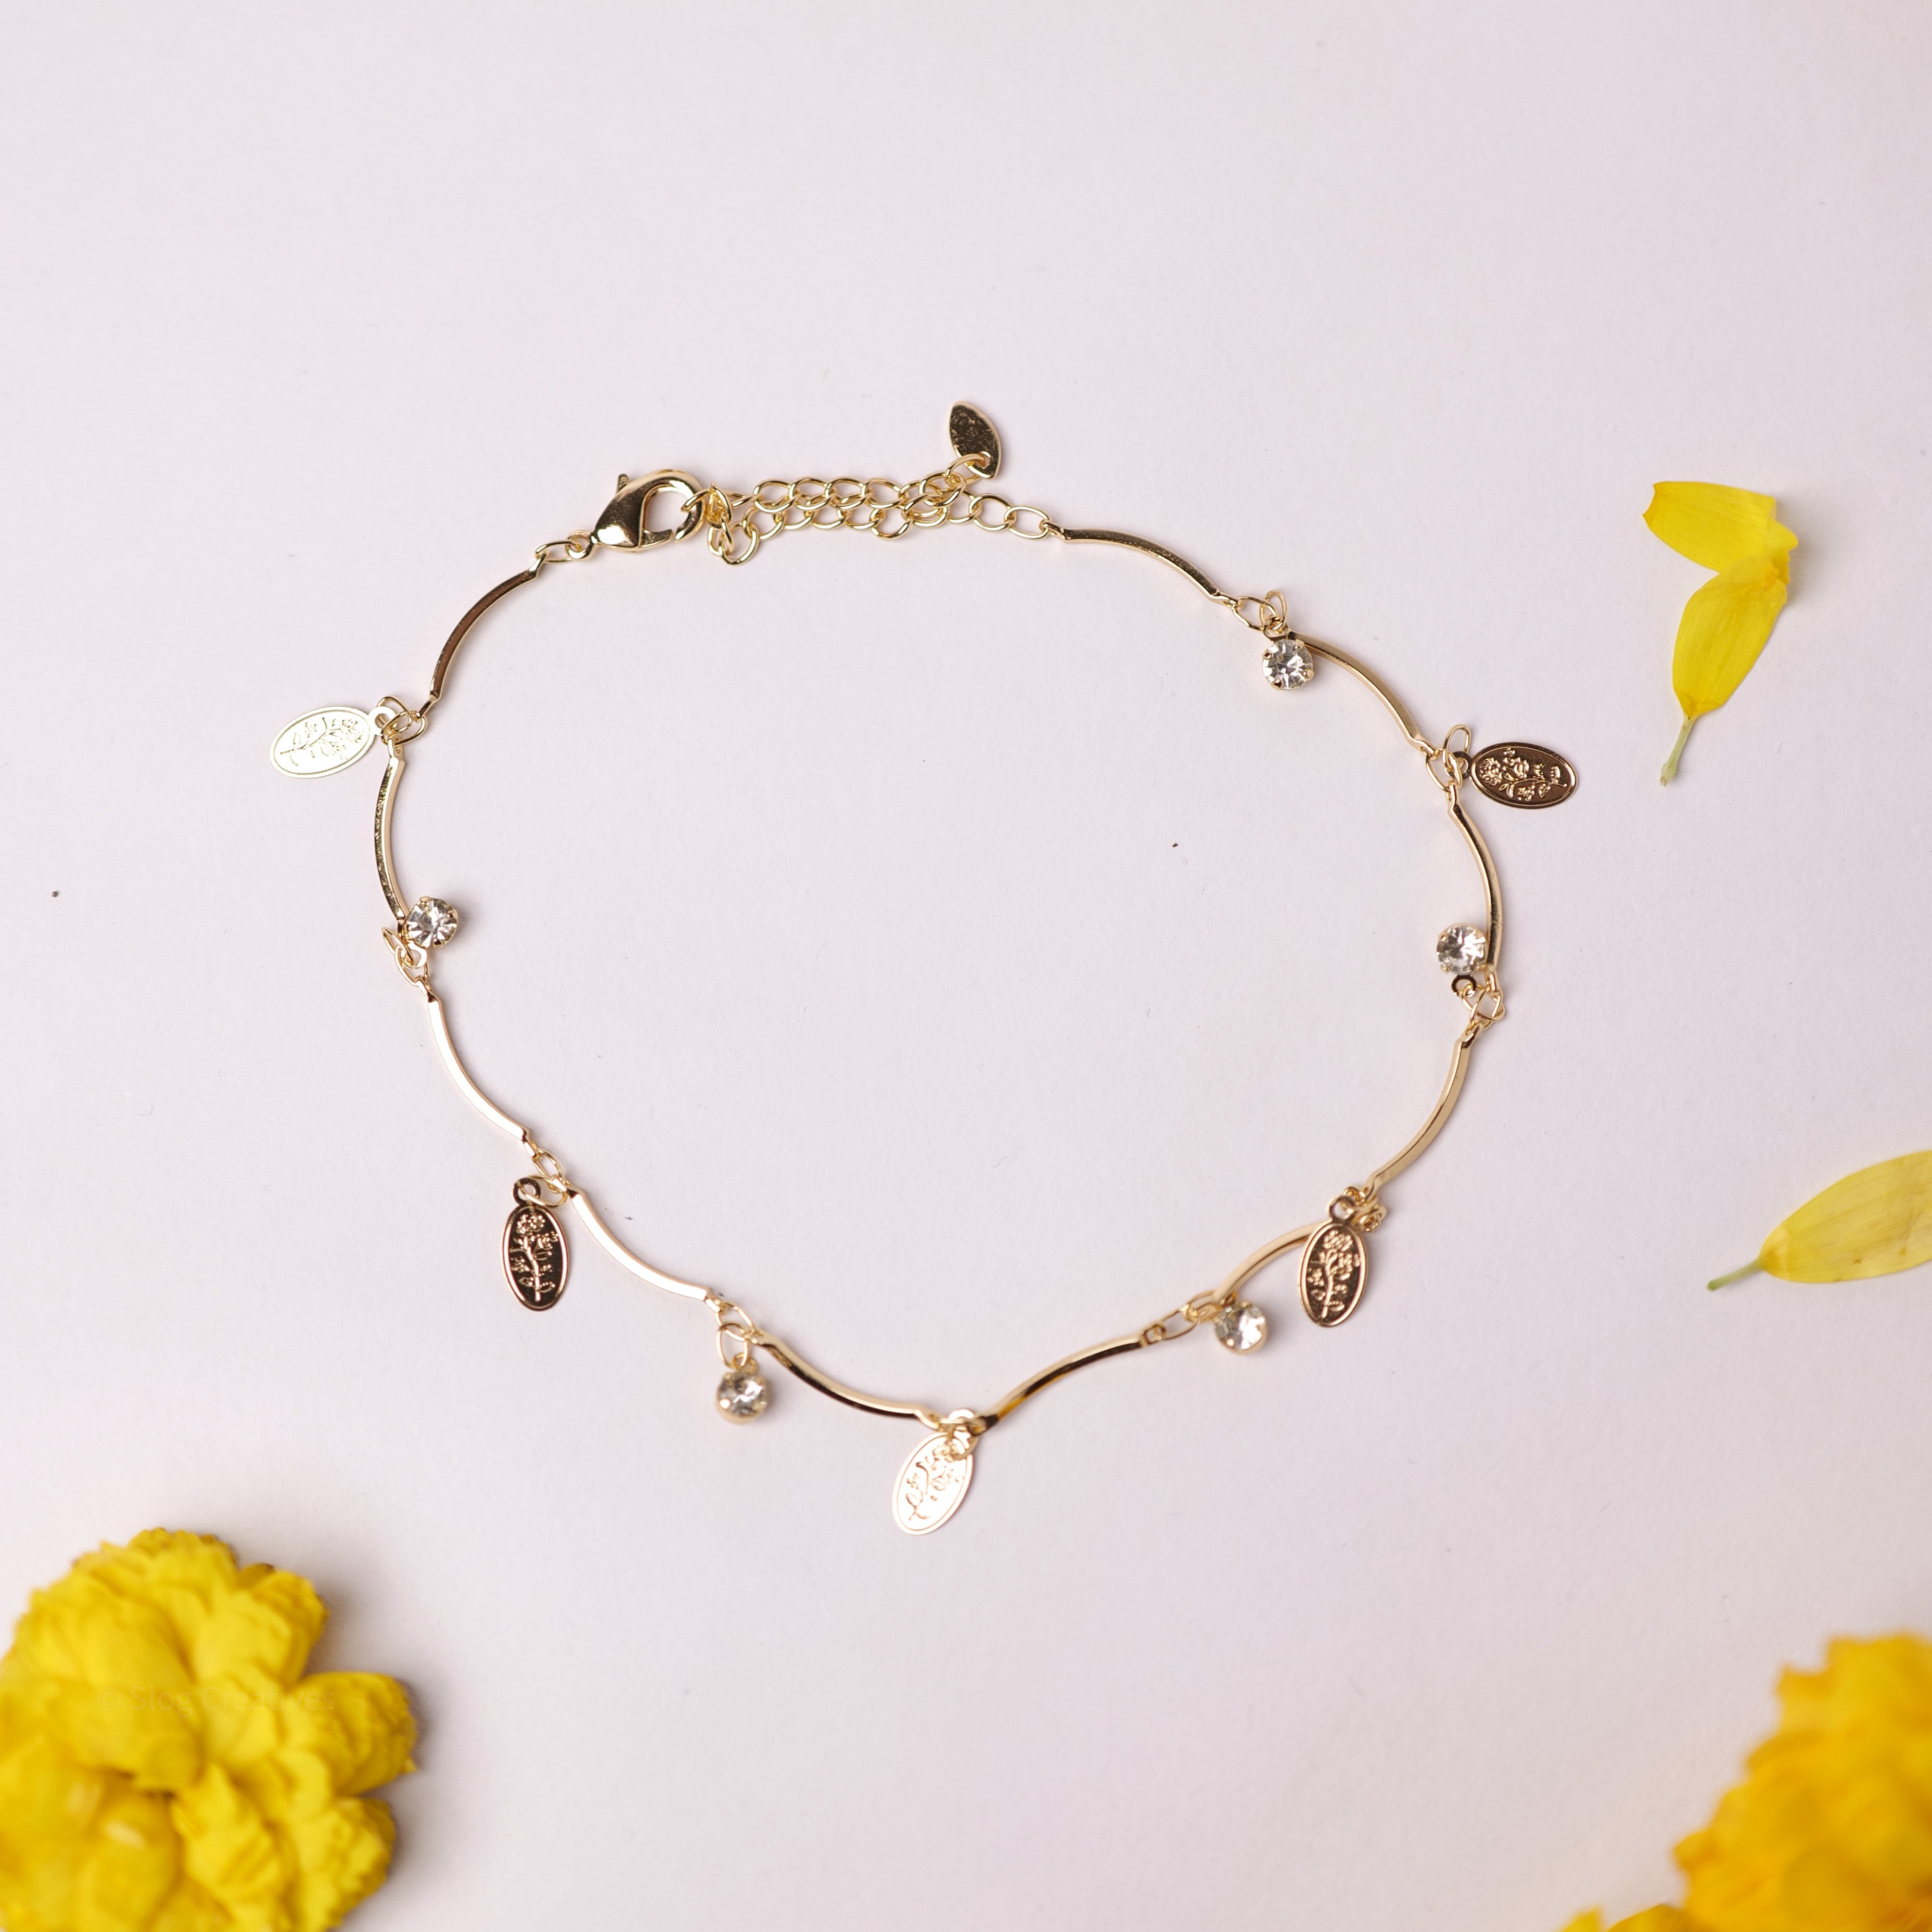 Gemma Stone and Charm Anklet